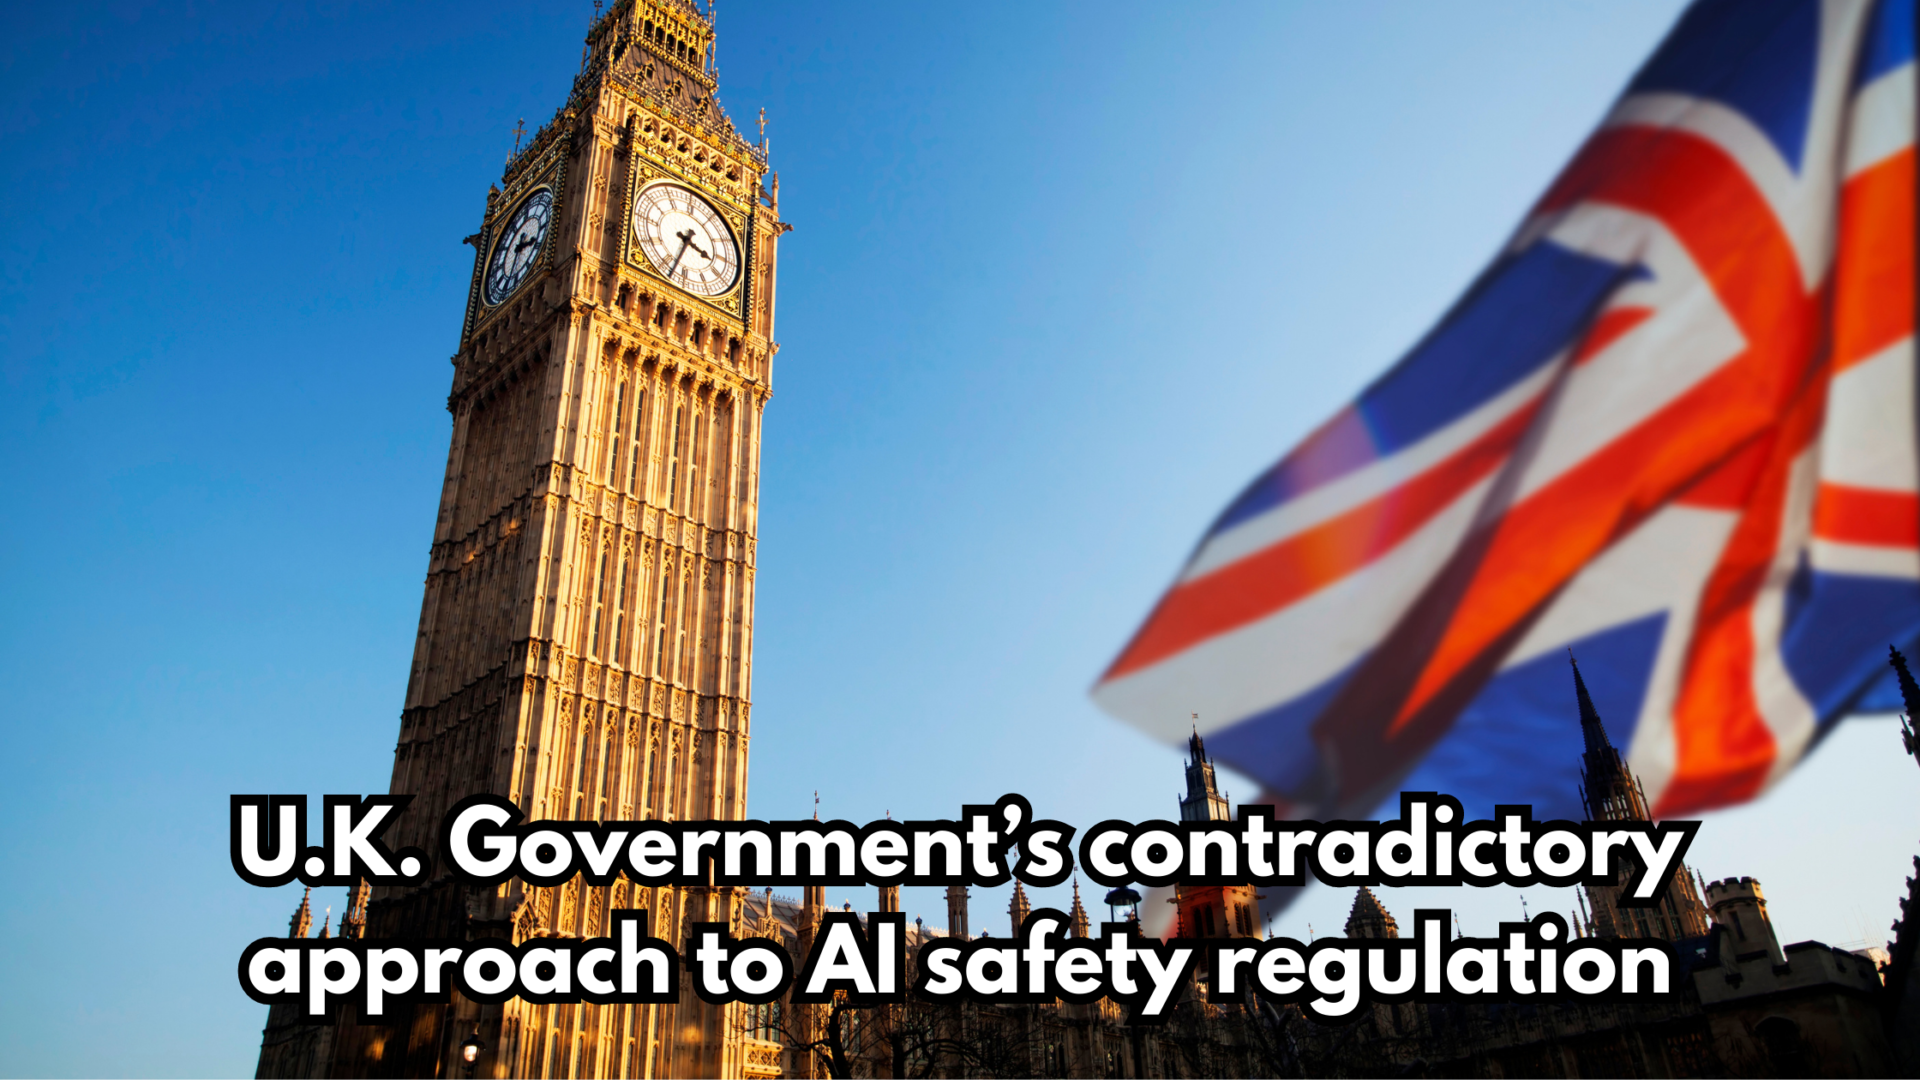 U.K. Government contradictory approach to AI safety regulation